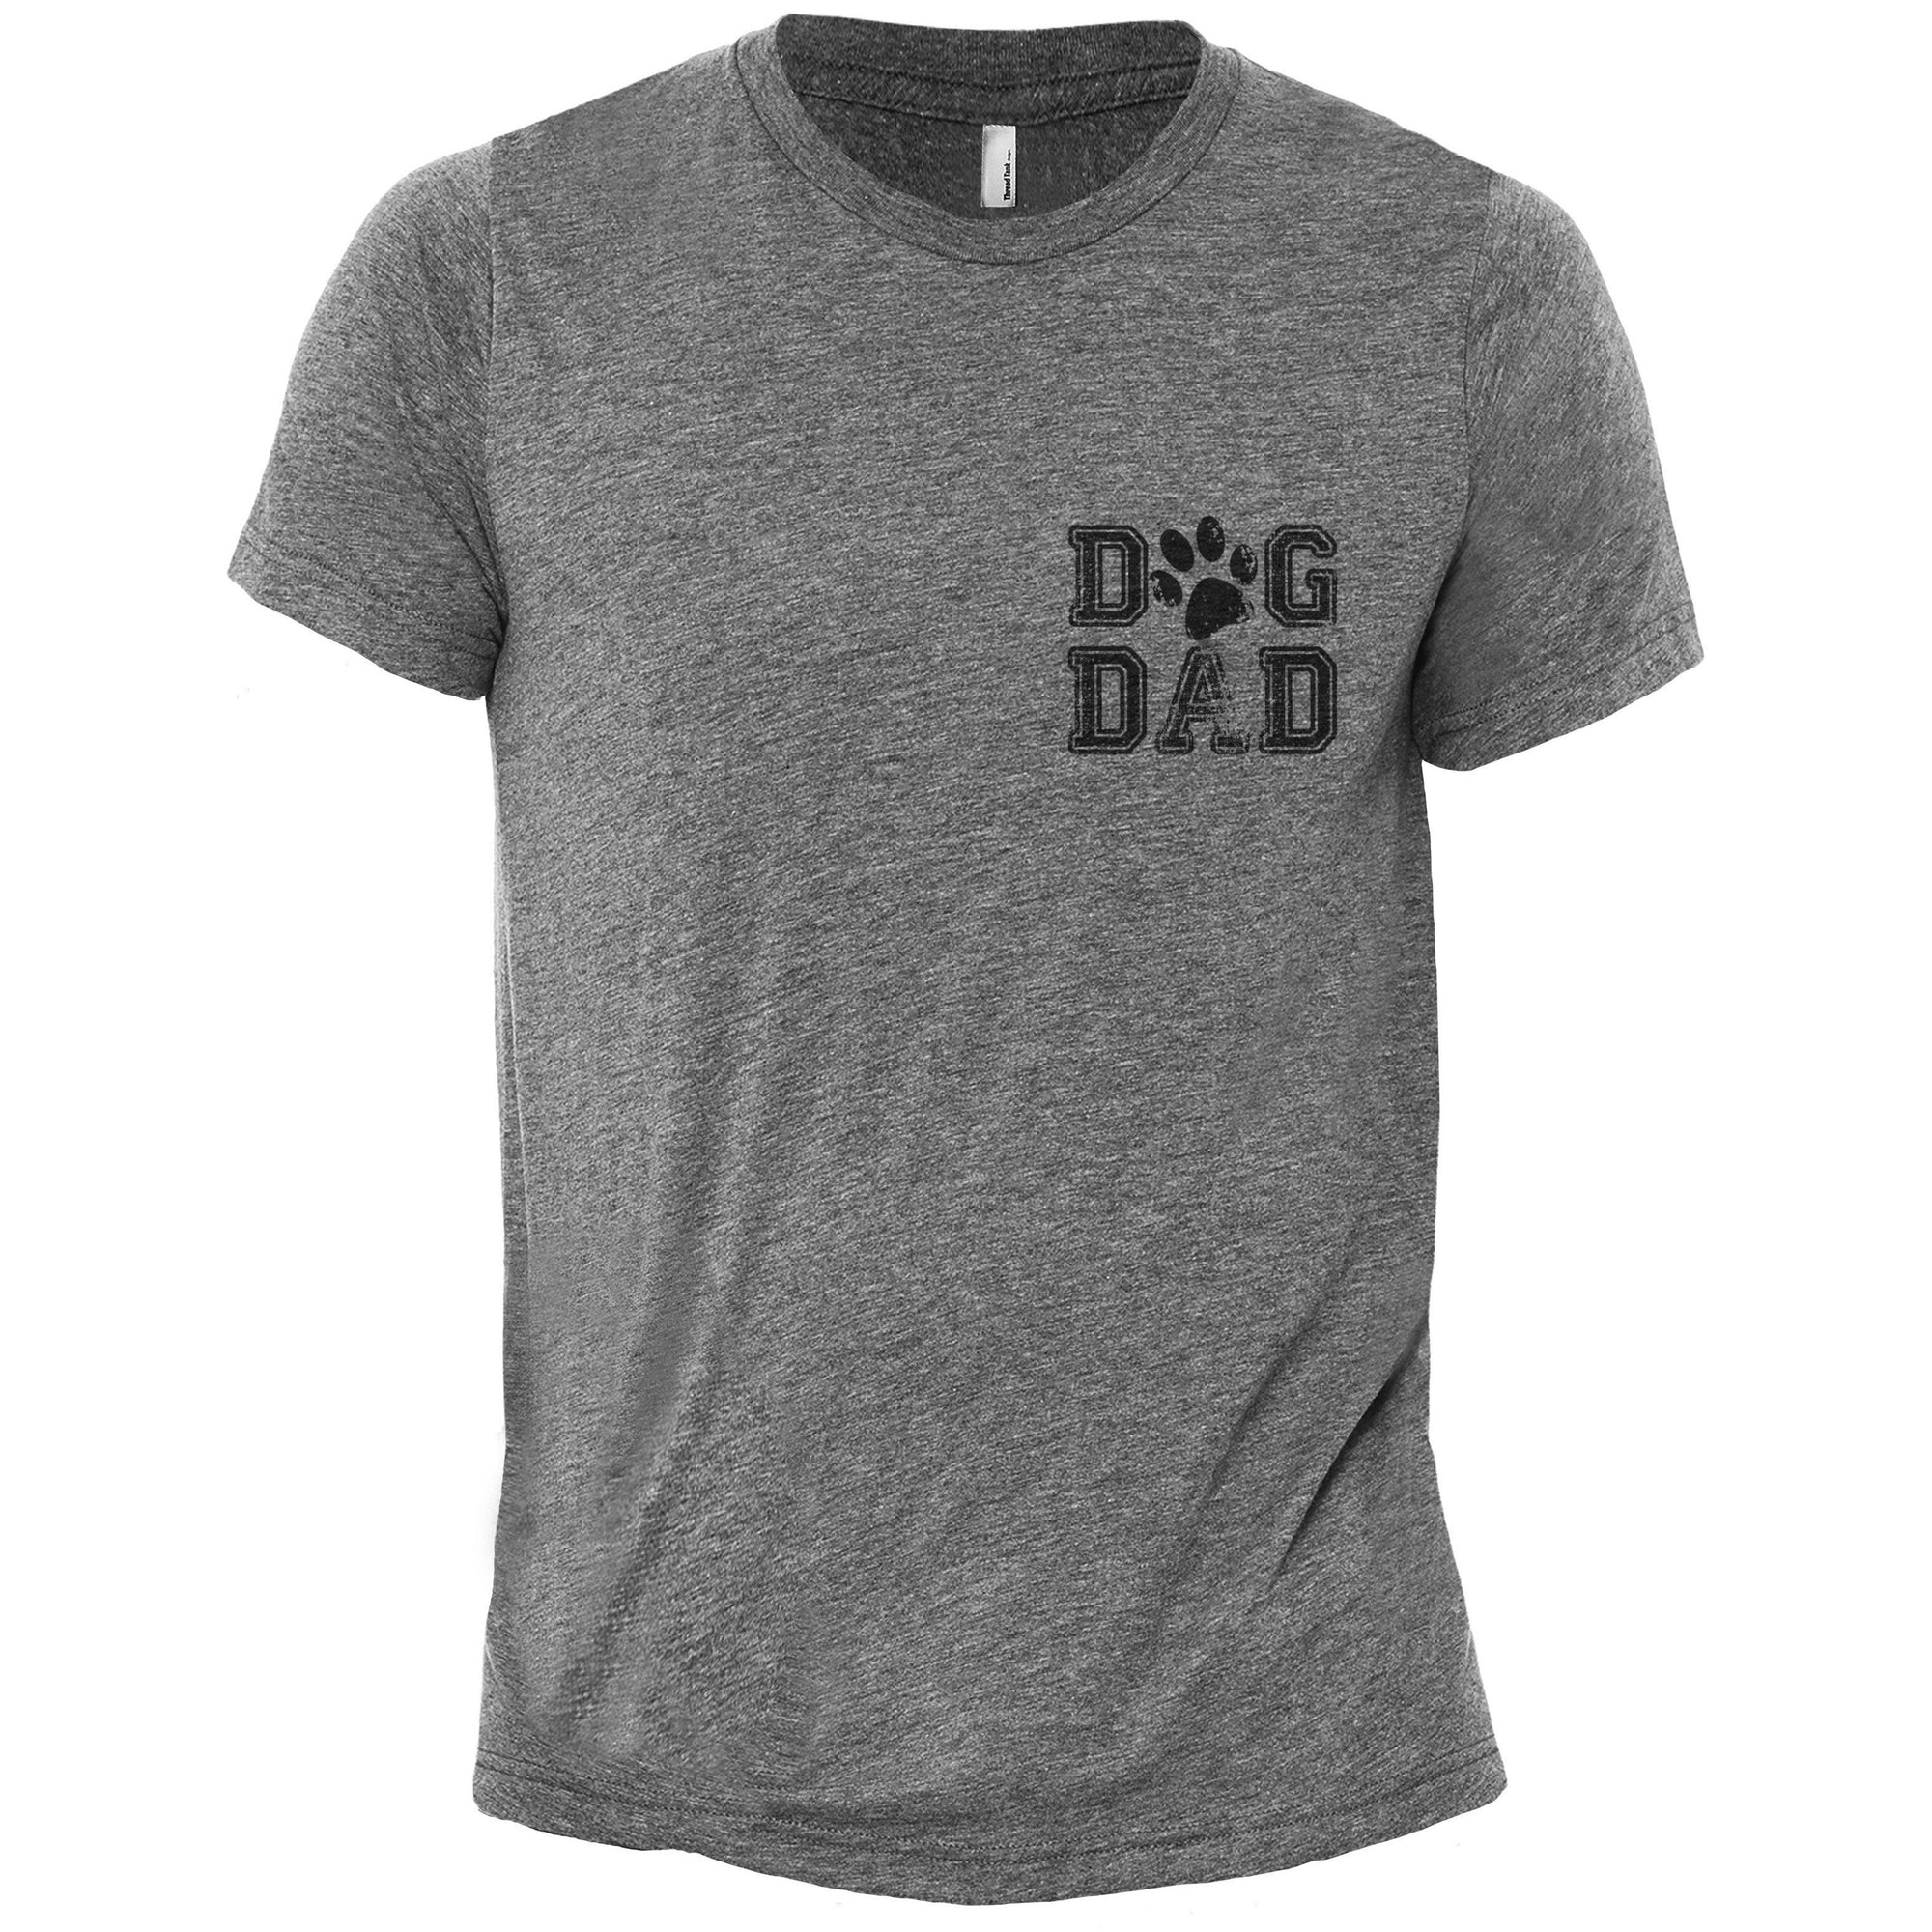 Dog Dad Charcoal Printed Graphic Men's Crew T-Shirt Tee